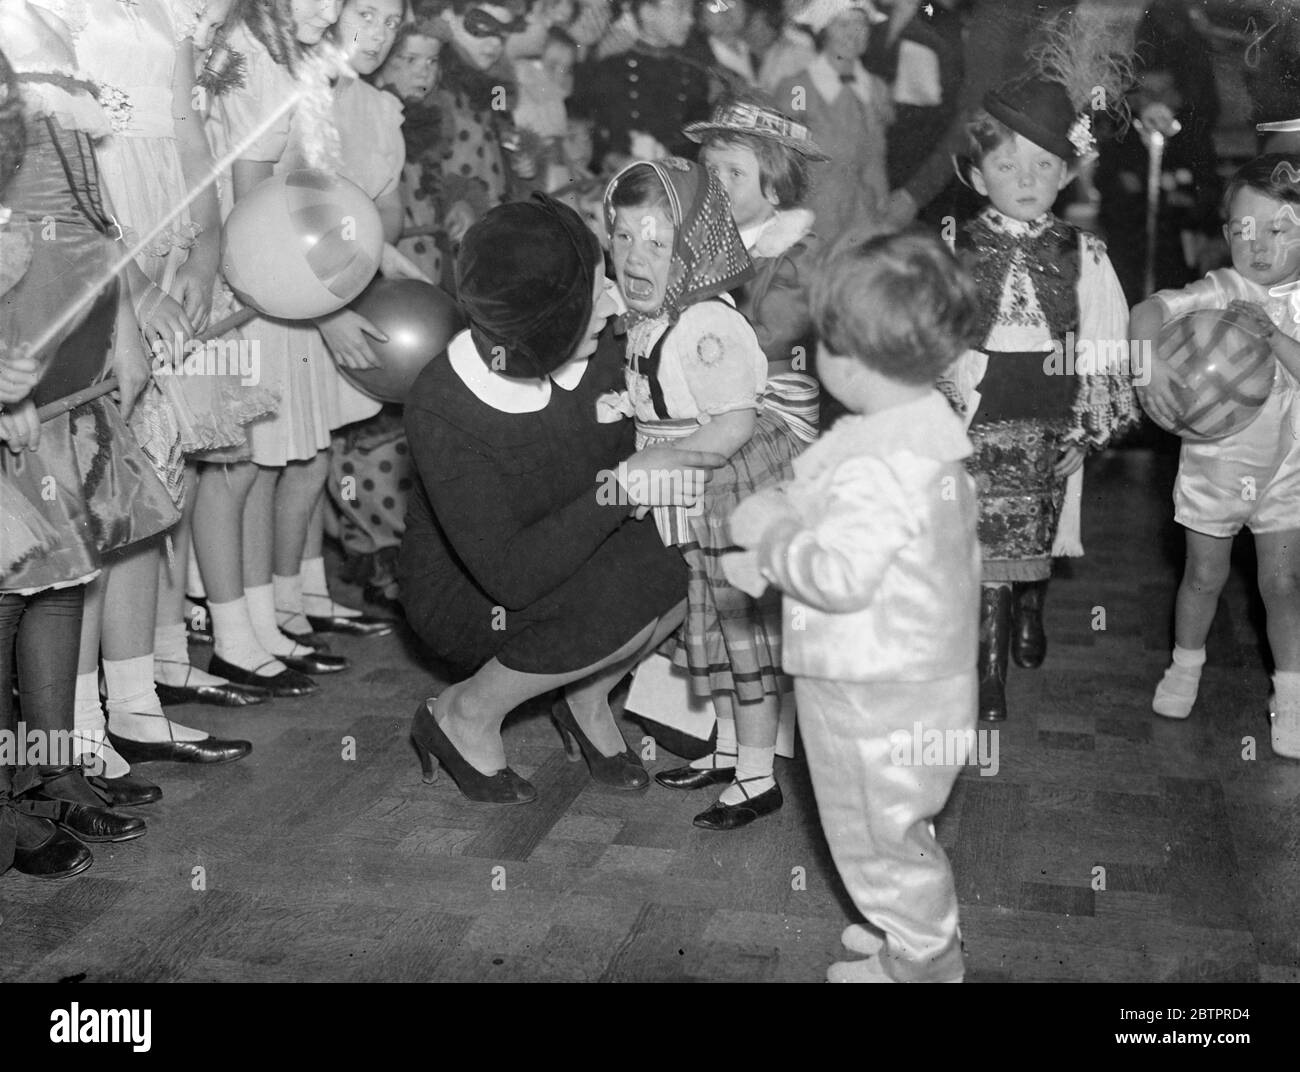 Guest lost the party spirit. A small guest, who became scared, burst into tears and had to be comforted during the costume parade at the 18th annual 'Peter Pan' fancy dress party at Claridges, London. The party was given in aid of Dr Barnardo's Homes. 6 January 1938 Stock Photo